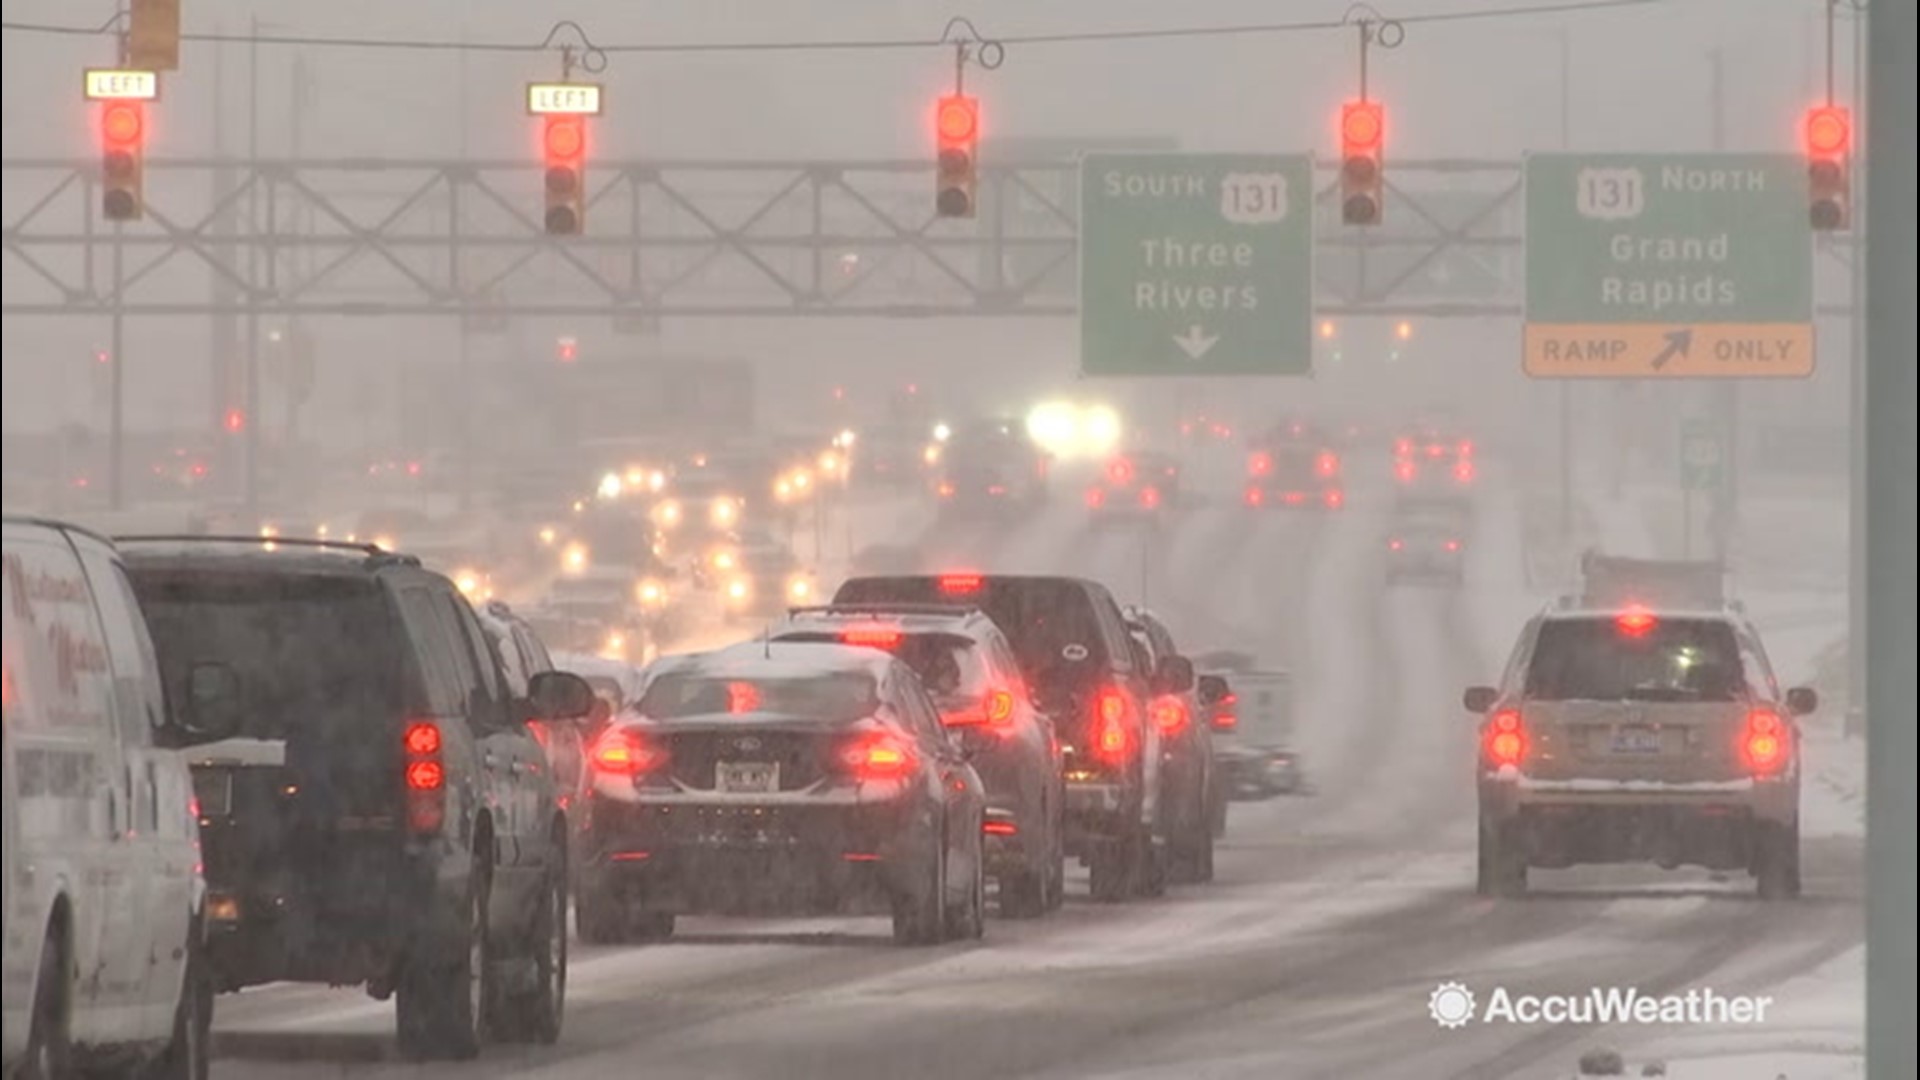 There was morning snowfall, lowered visibilities and snow covered road conditions around the Kalamazoo, Michigan region. Video shows traffic and morning conditions during the commute.